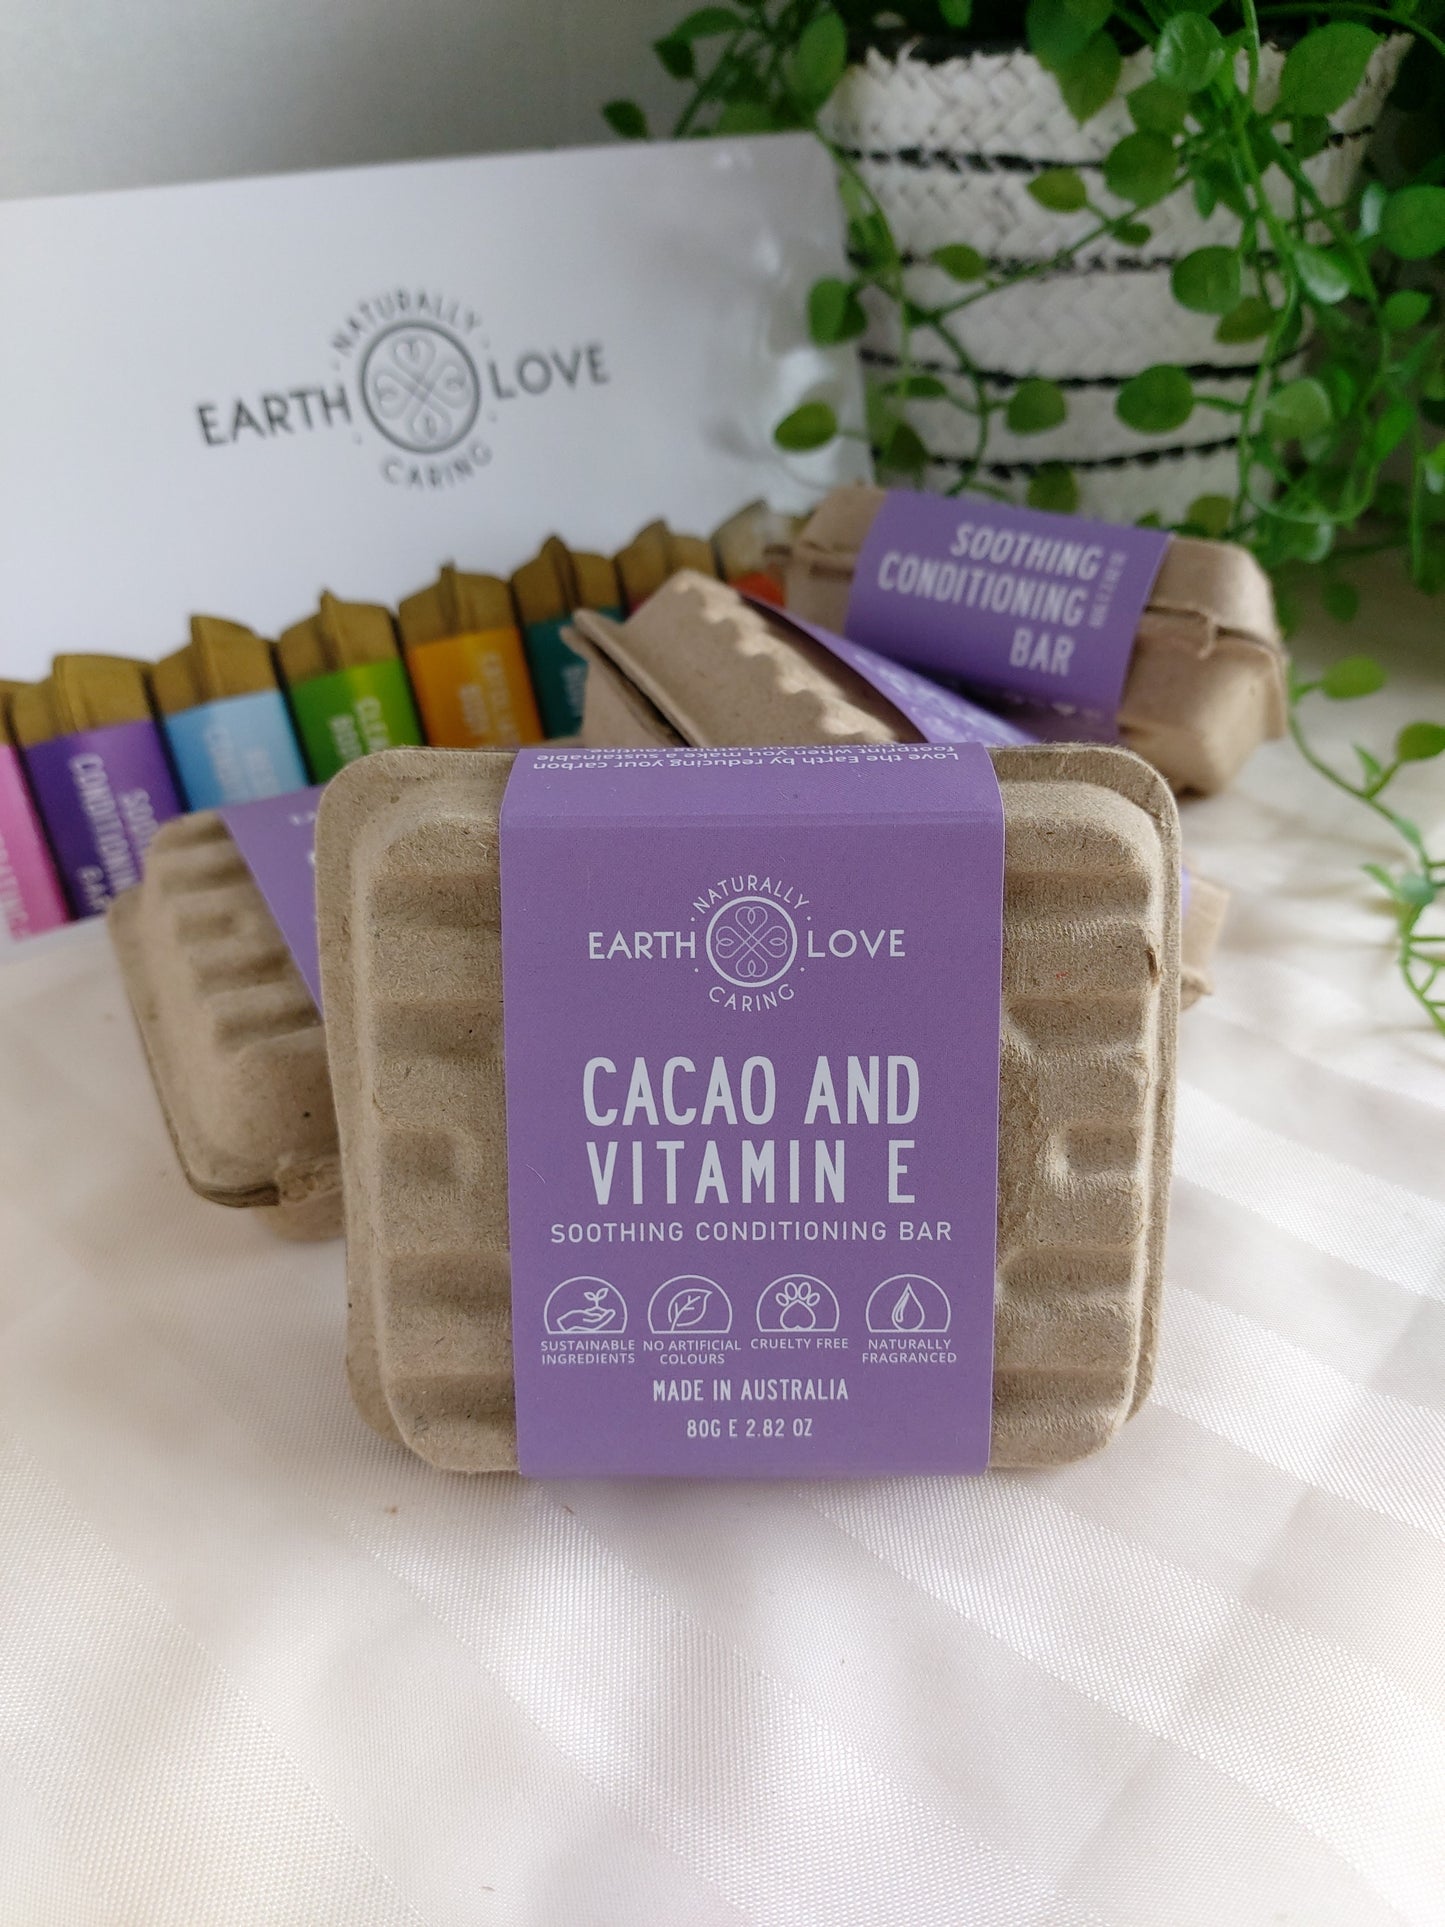 Conditioning Bars by Earth Love